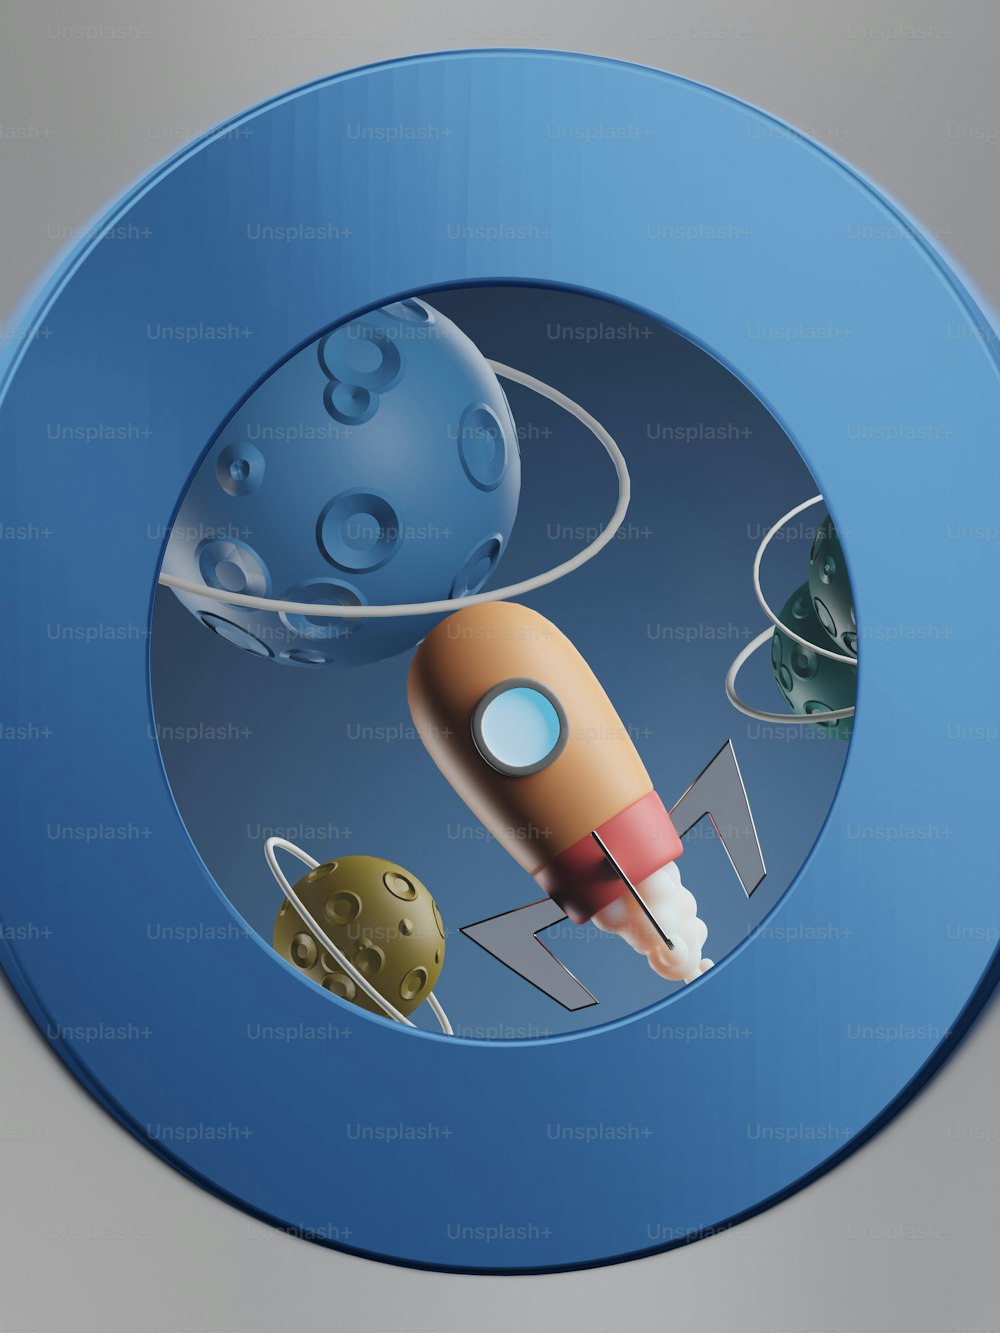 a blue button with a picture of a rocket and planets